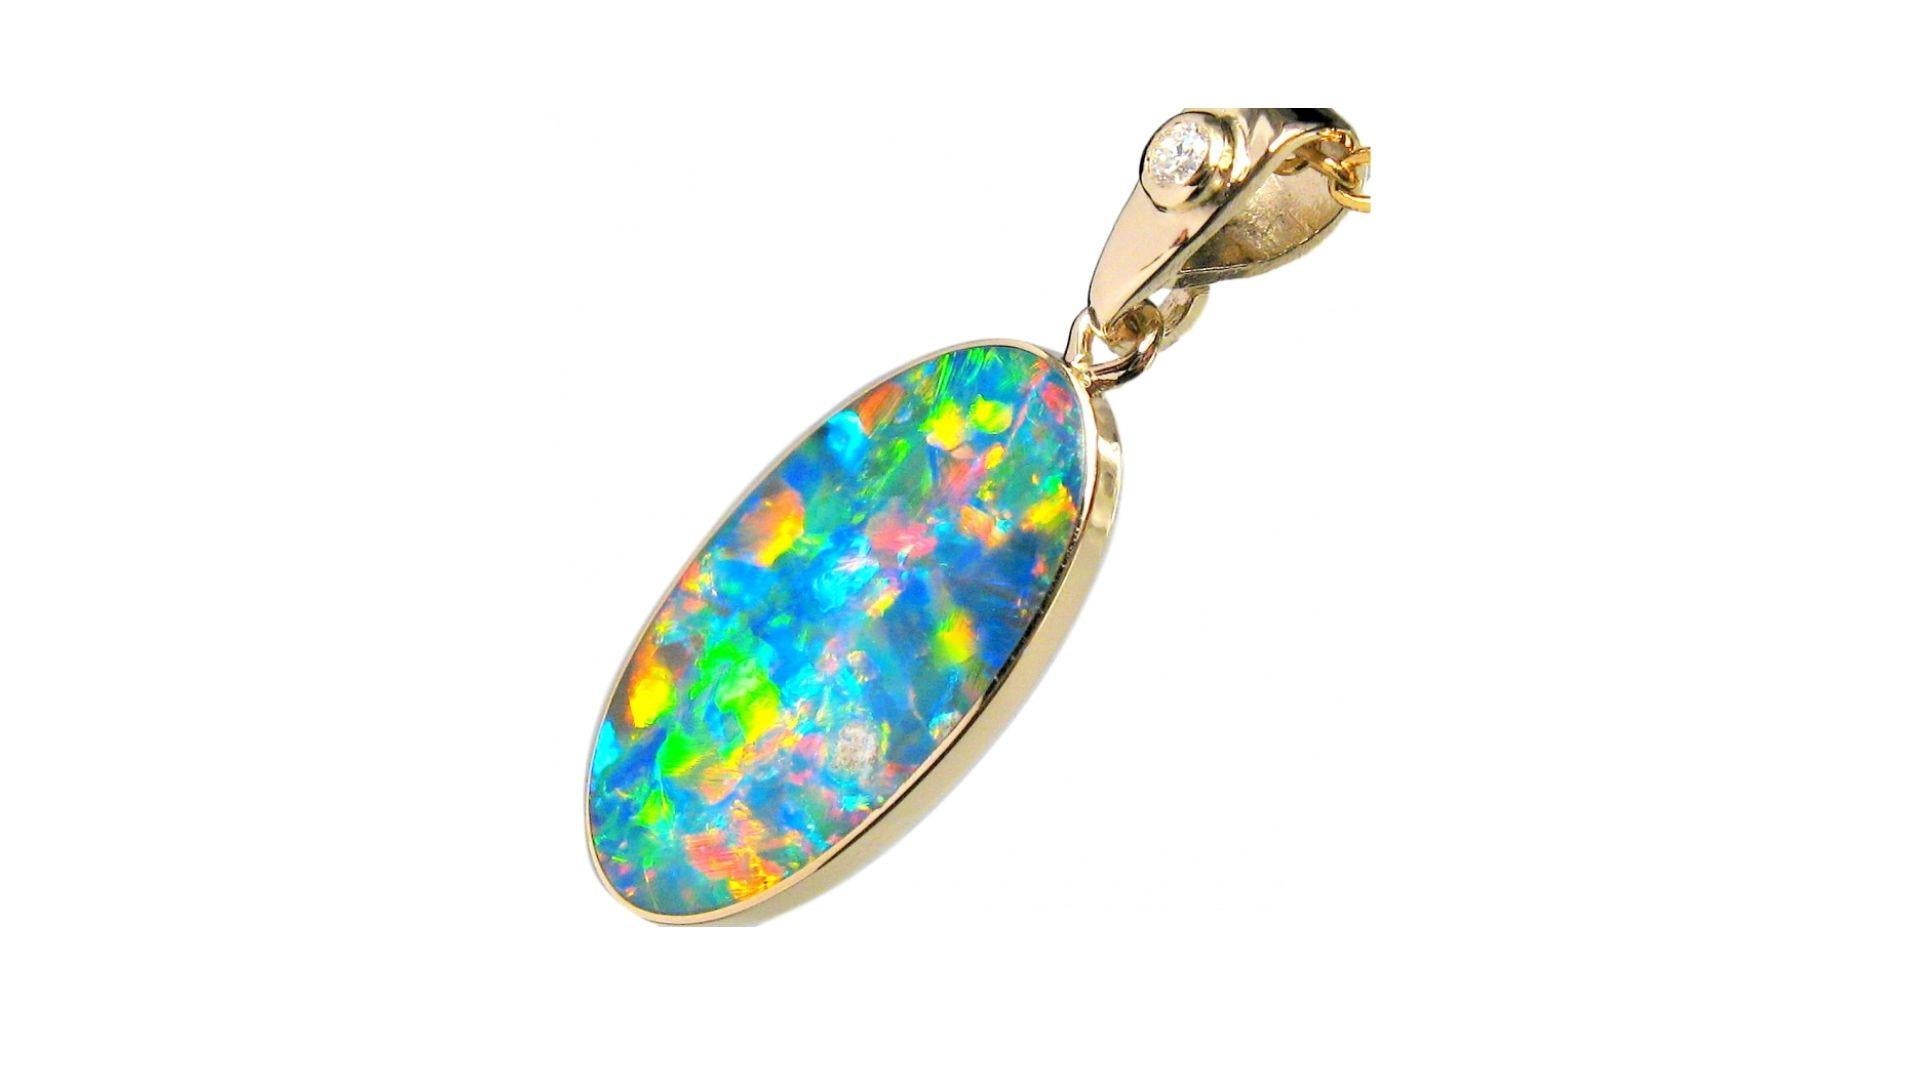 Contemporary Australian Opal Necklace with Option of Earrings 14k Yellow Gold